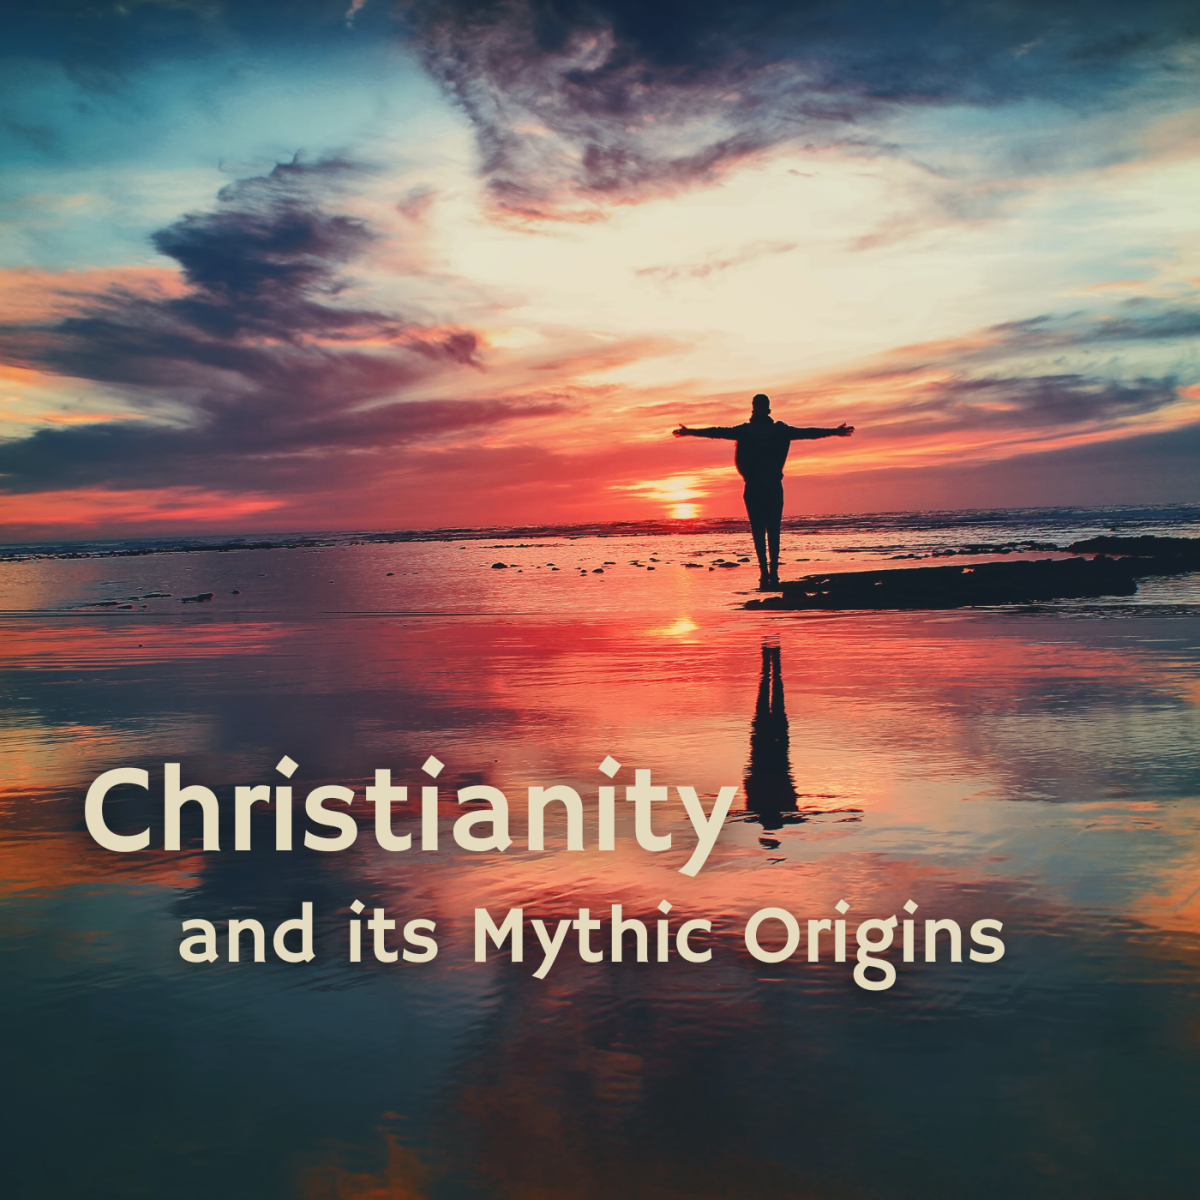 Christianity has much in common with mythic religions and the worship of sun gods.